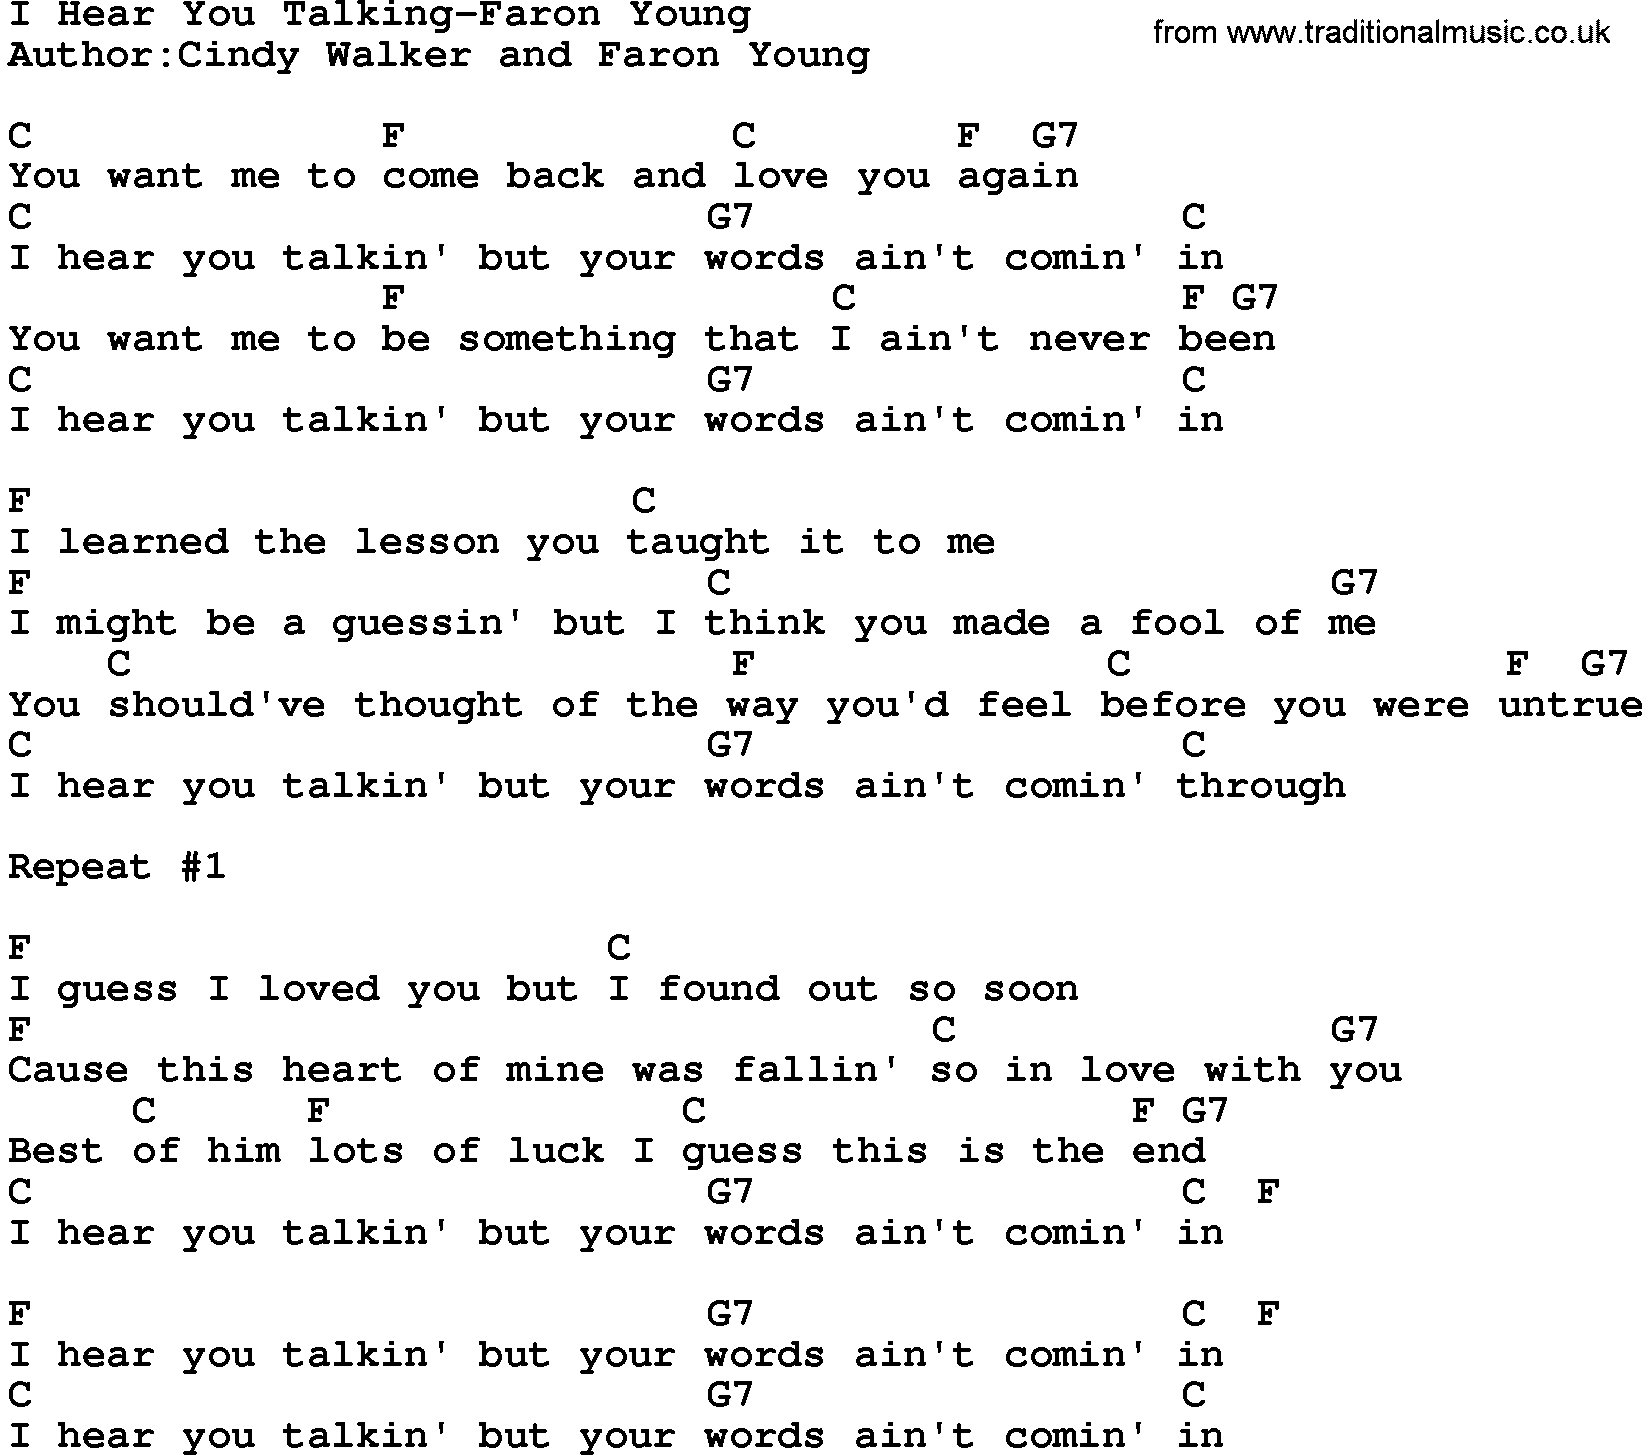 Country music song: I Hear You Talking-Faron Young lyrics and chords